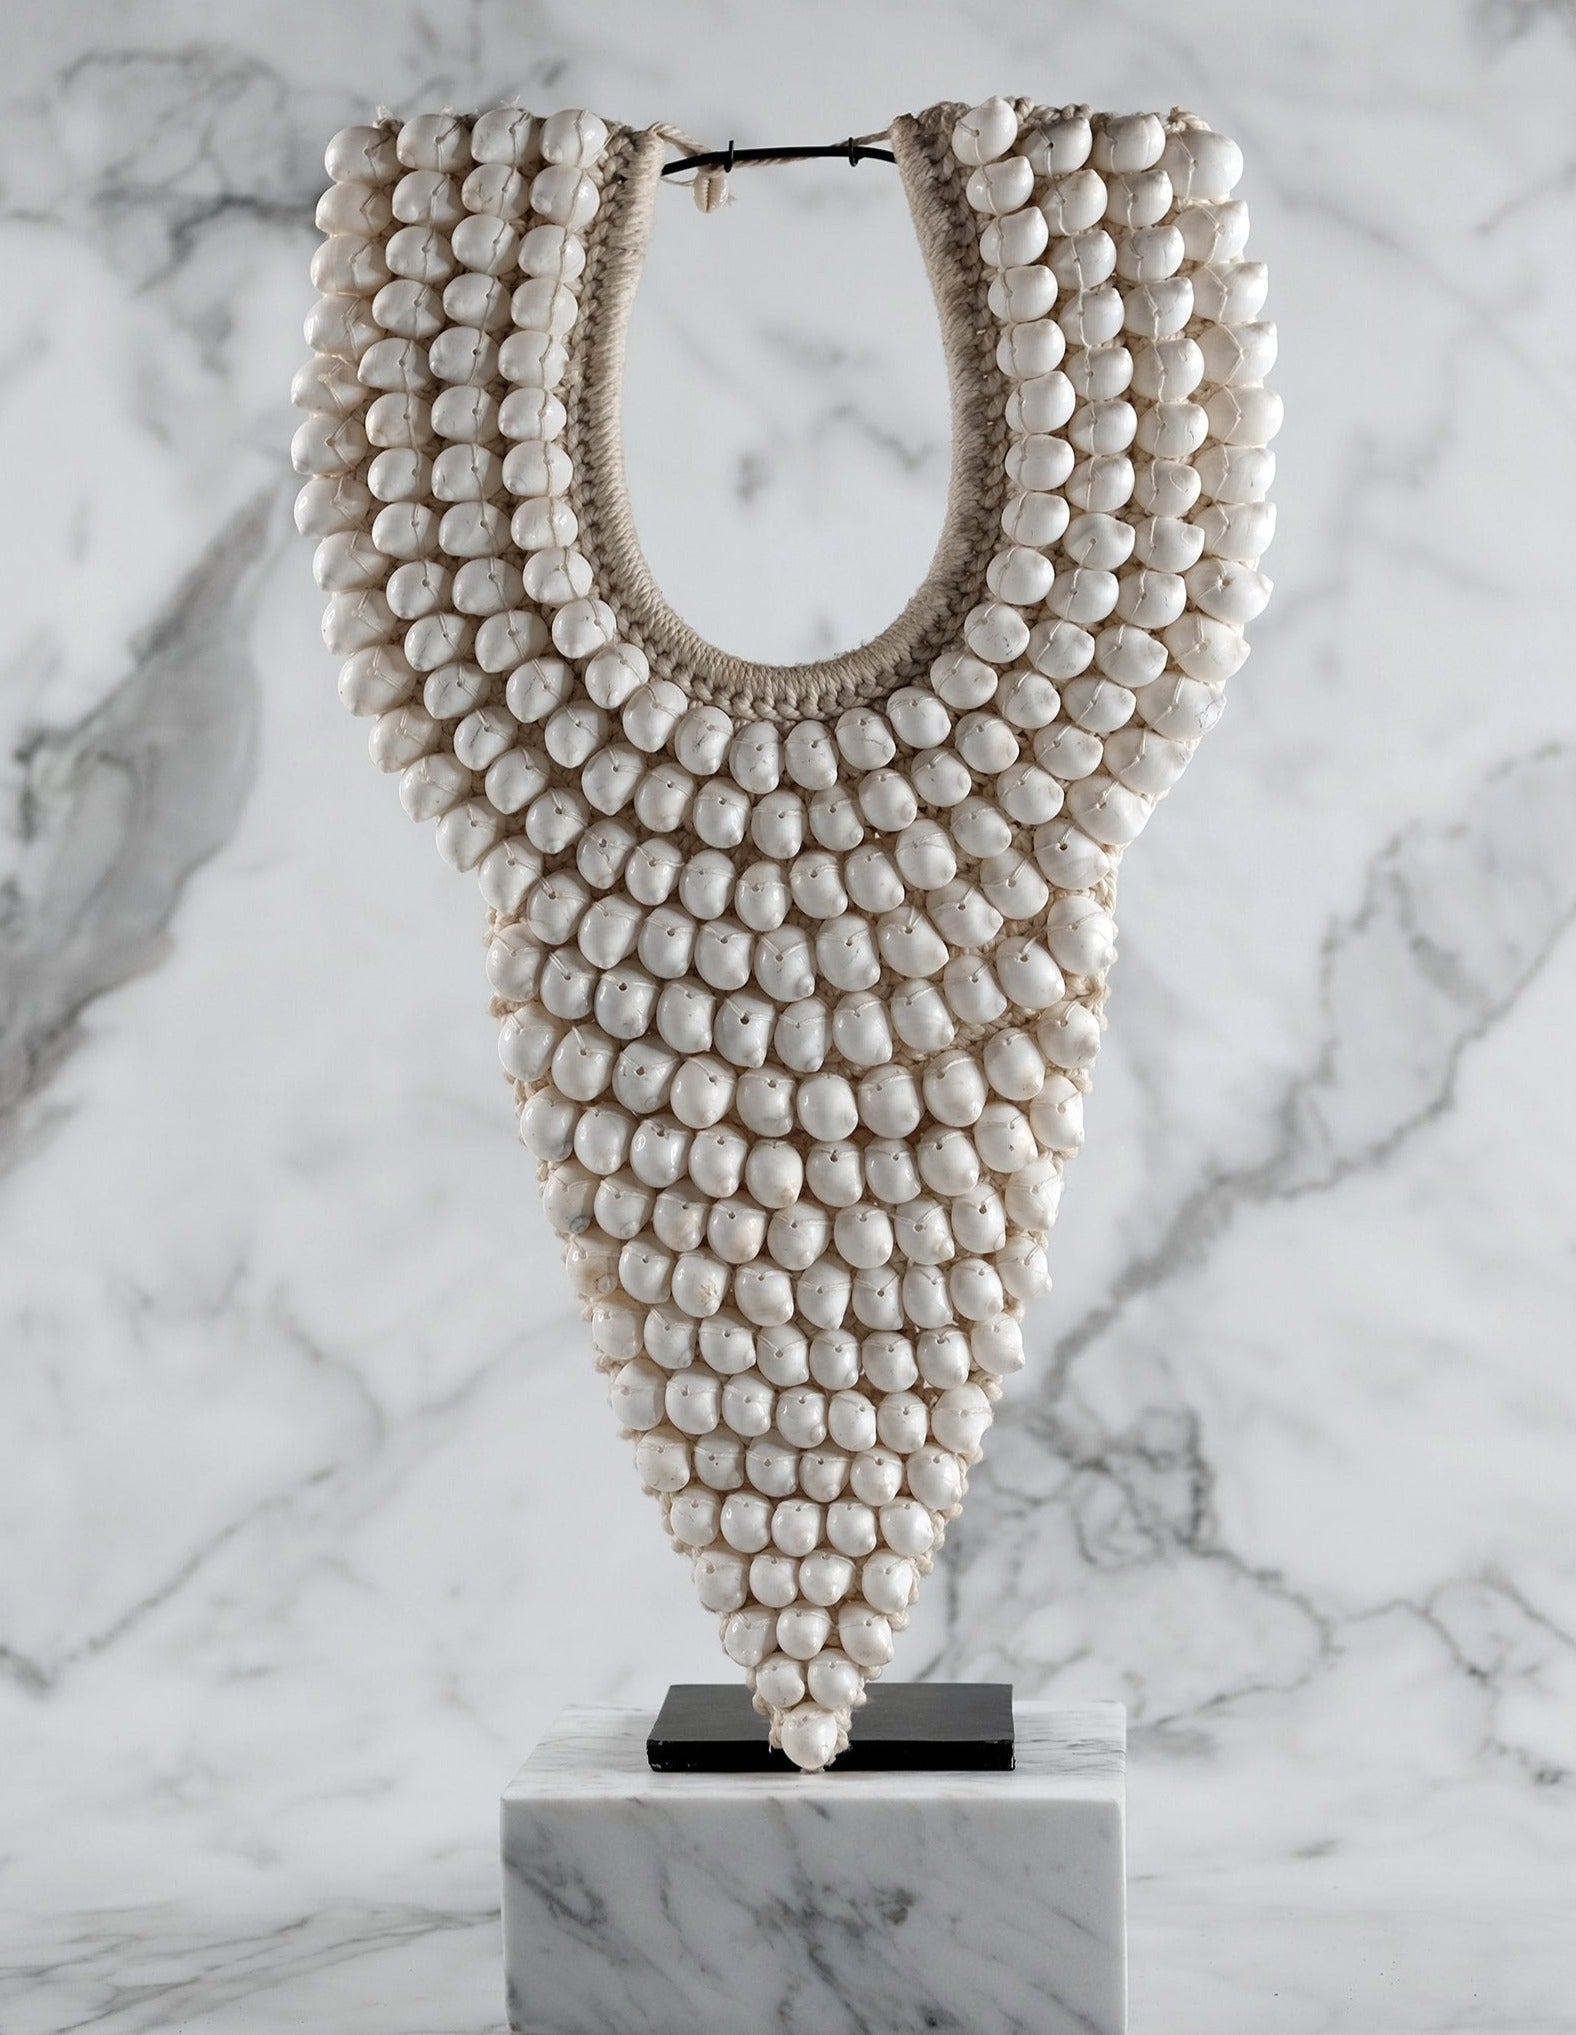 Balinese ceremonial shell necklace